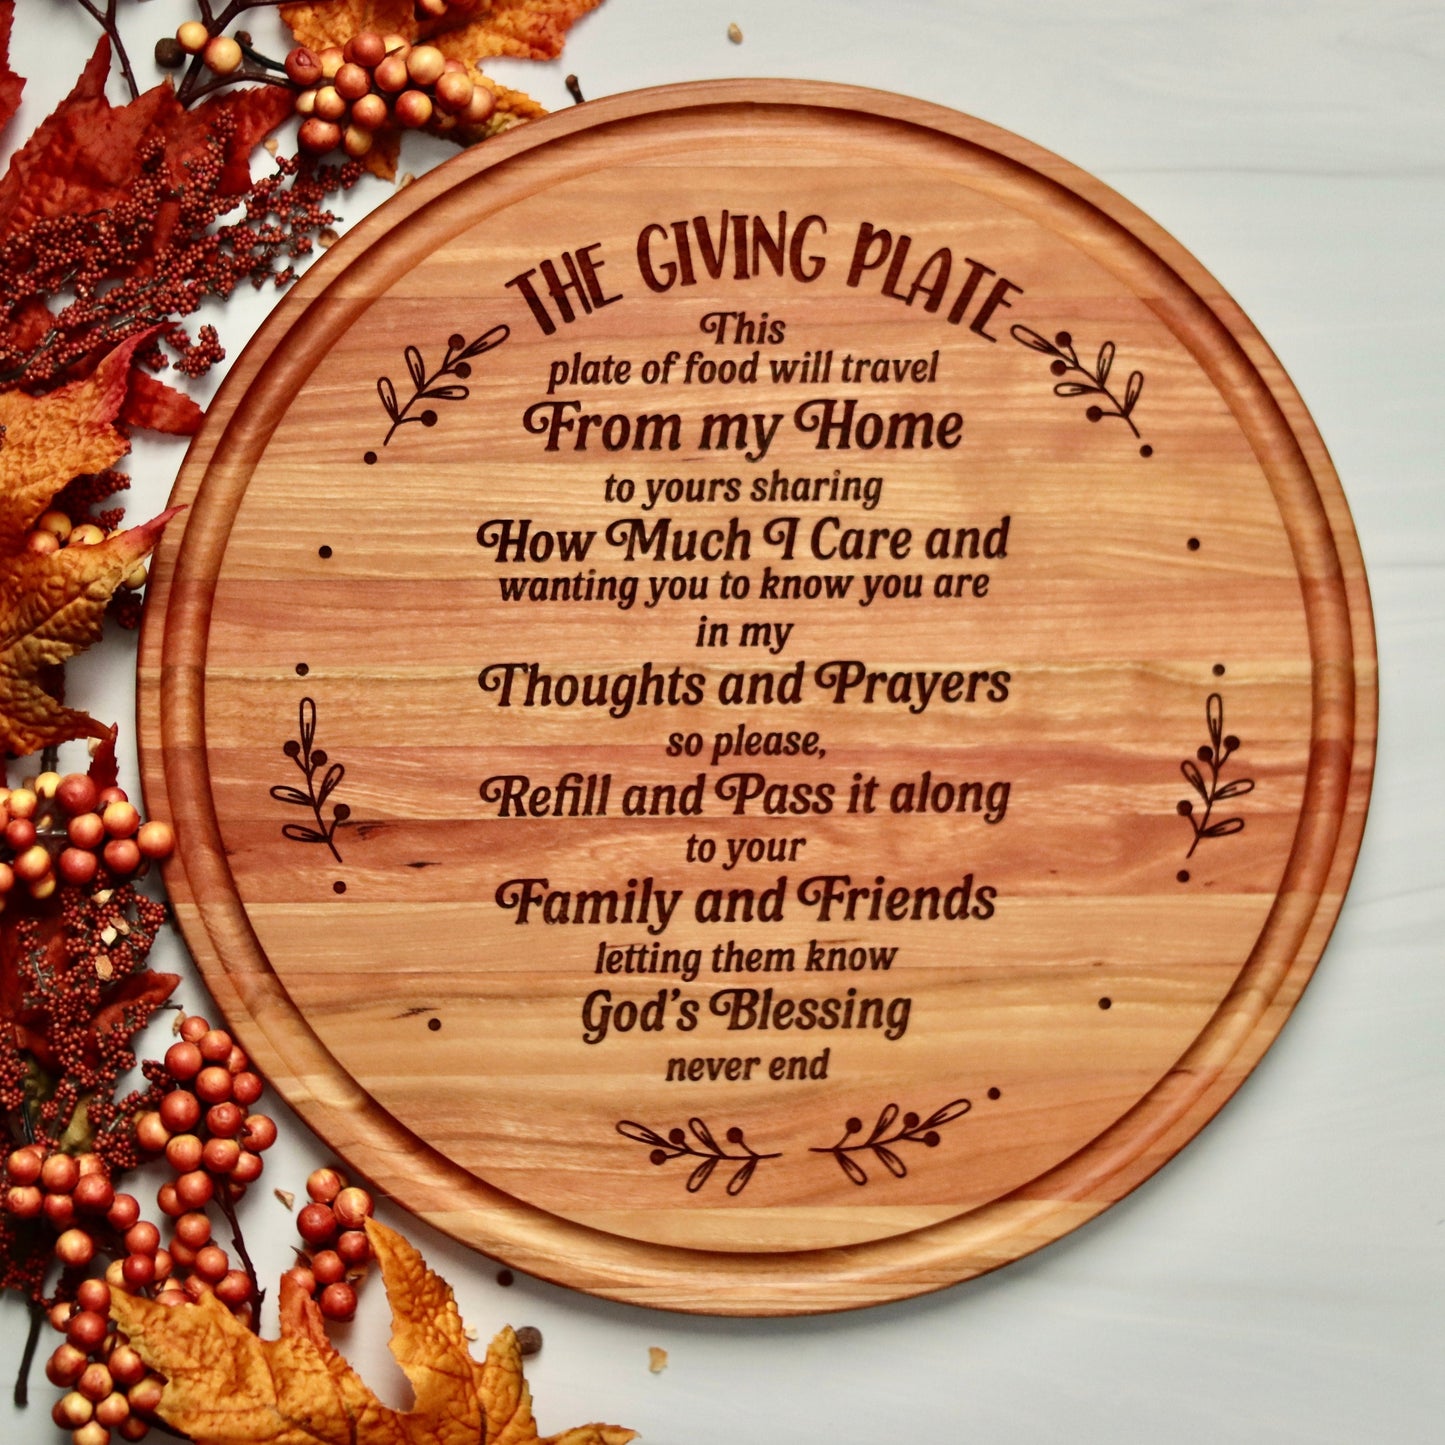 The Giving Plate, Circle of Giving, Holiday Gifting, Sharing Platter, Religious Gift,  Bakers Present, Thanksgiving, Christmas, Hostess Gift